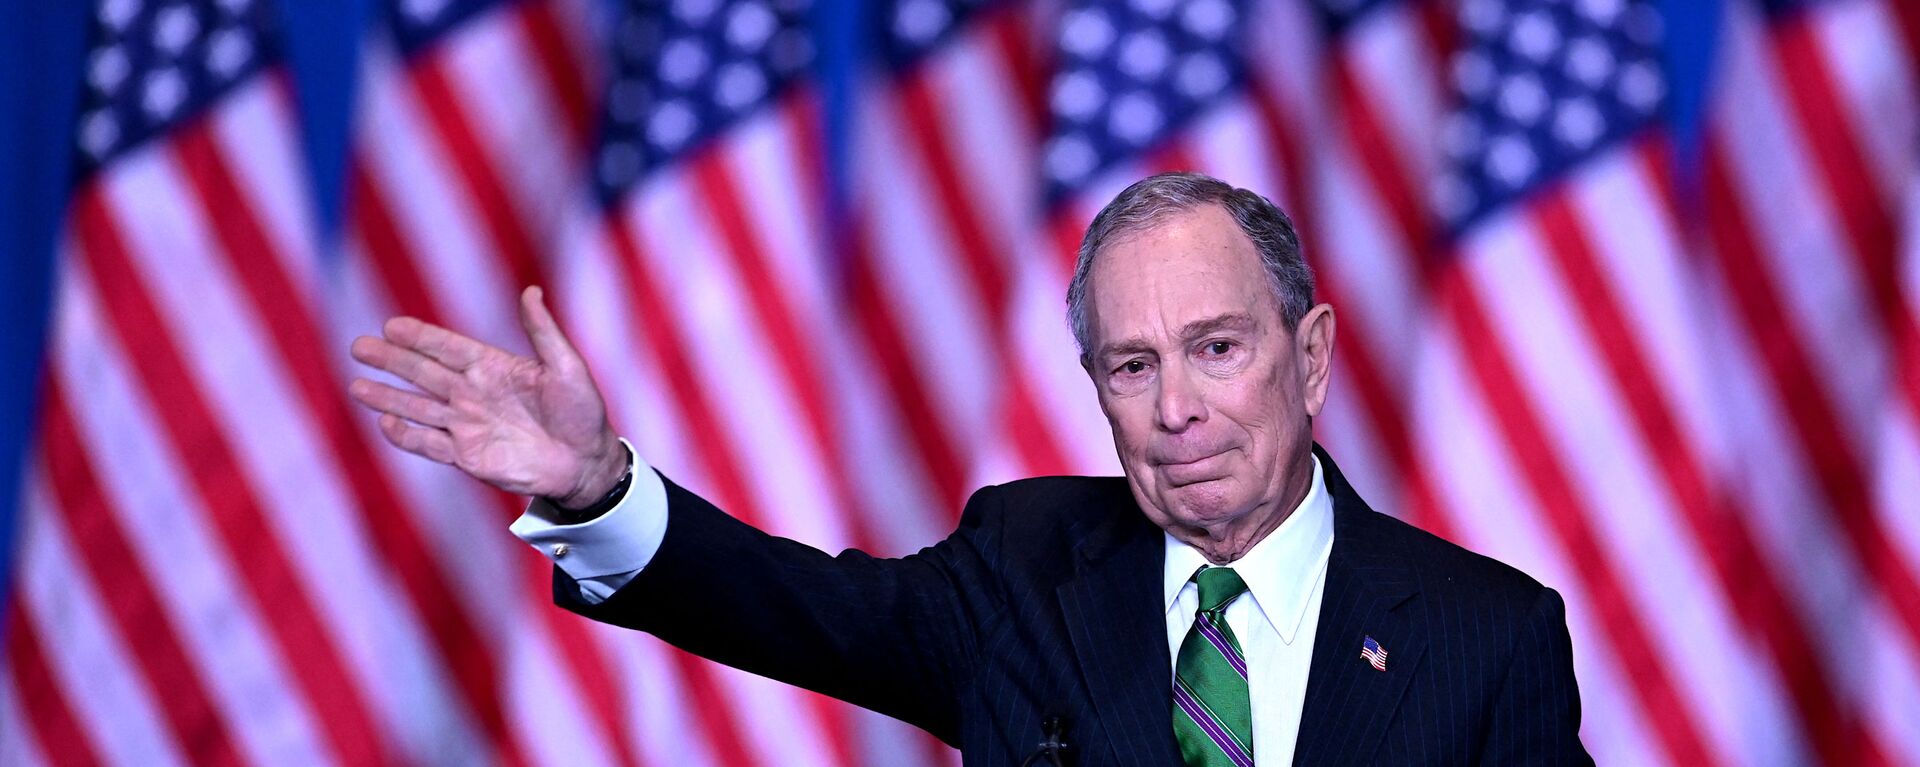 Former democratic presidential candidate and former New York City mayor Mike Bloomberg speaks to supporters and staff on March 4, 2020 in New York City. - Sputnik International, 1920, 10.06.2021